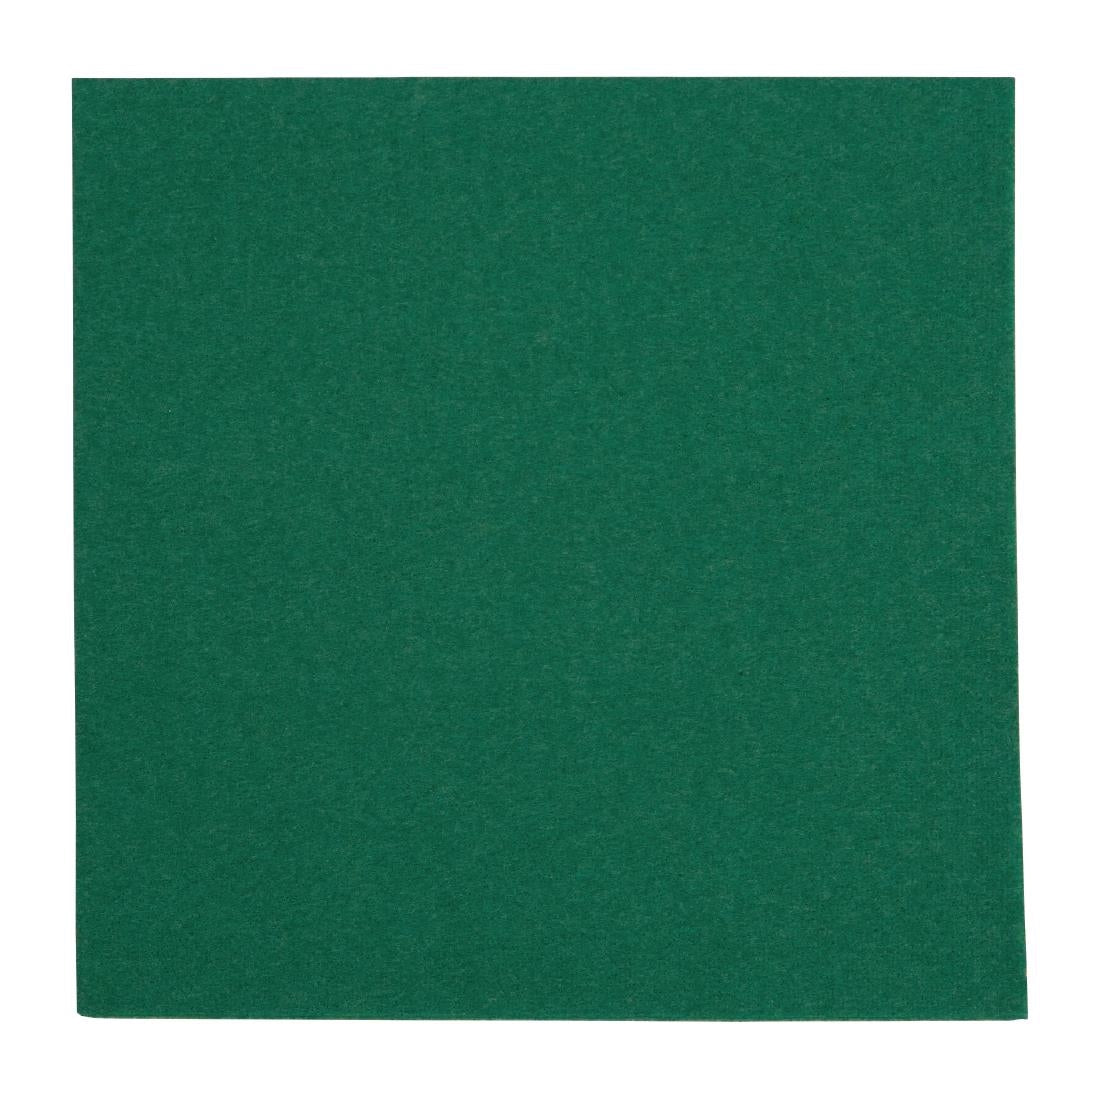 FE239 Fiesta Recyclable Dinner Napkin Dark Green 40x40cm 2ply 1/4 Fold (Pack of 2000) JD Catering Equipment Solutions Ltd